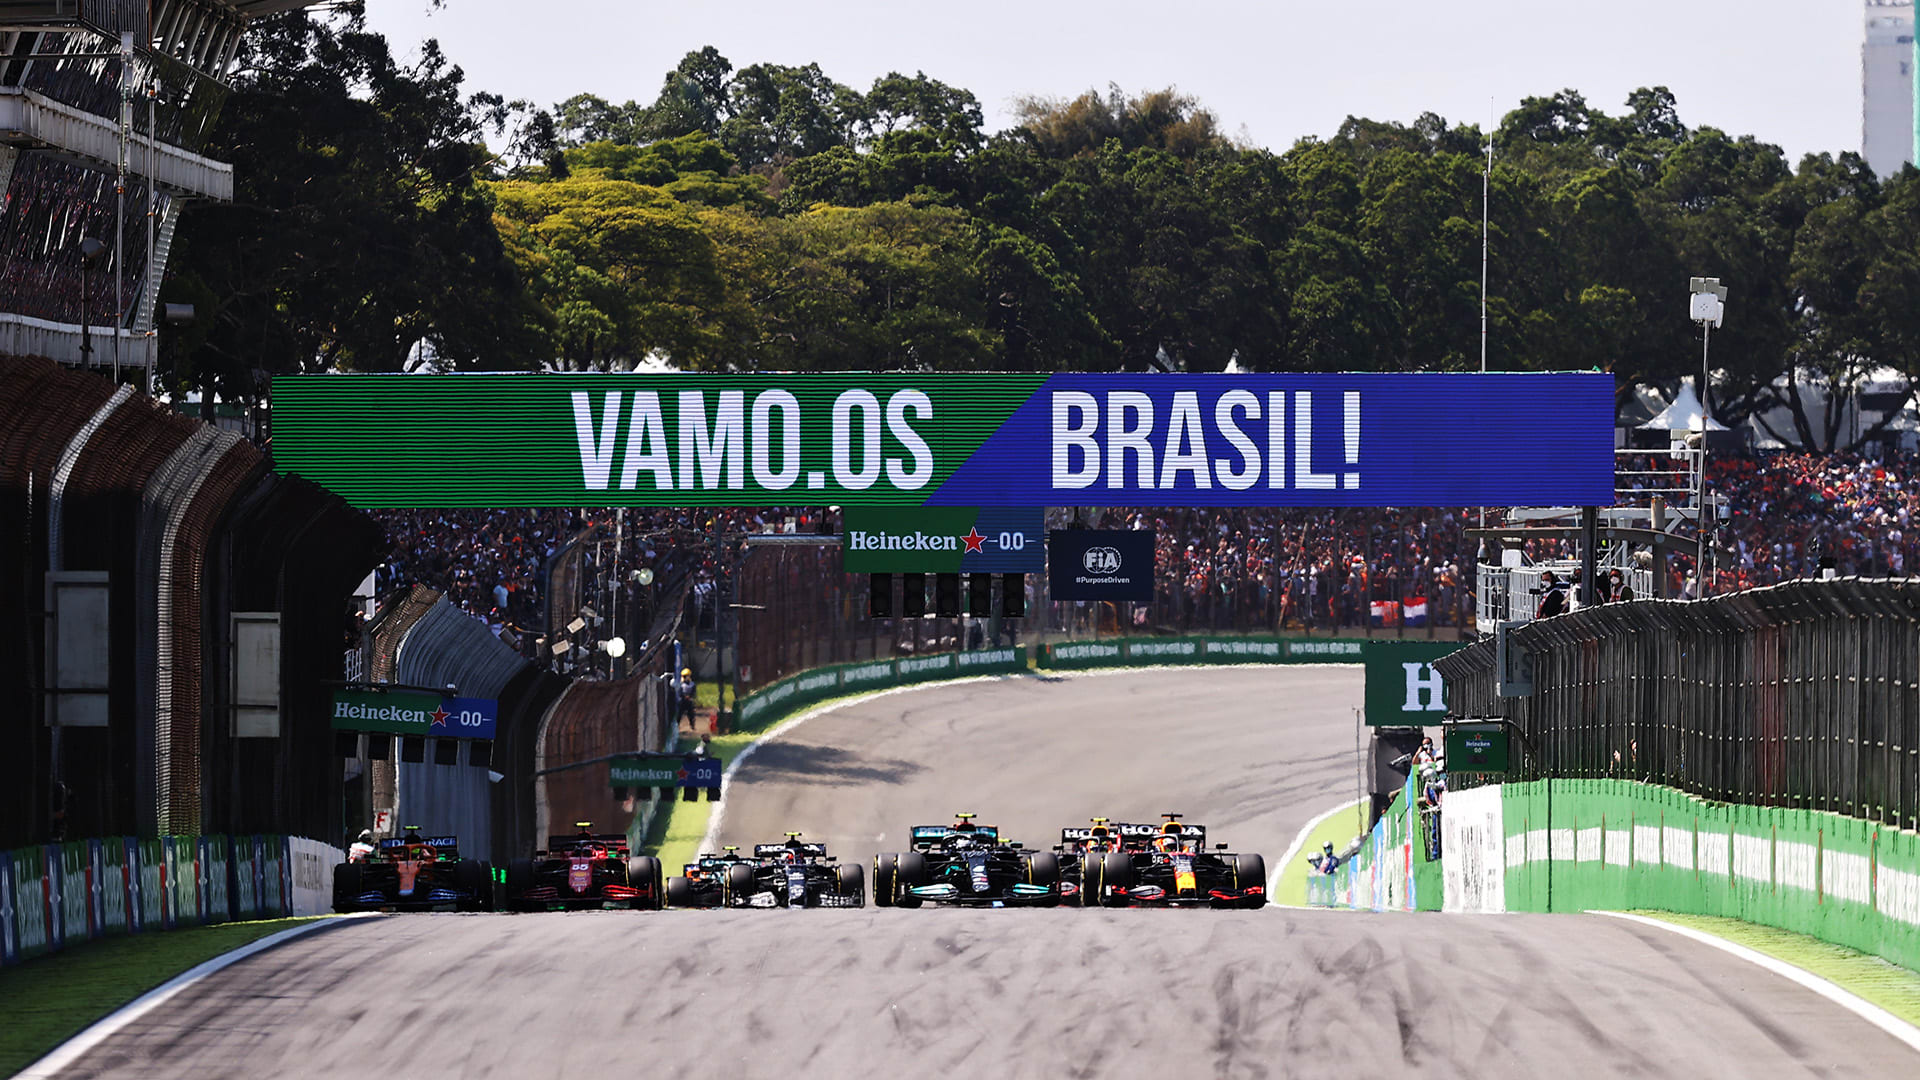 Contract Lengths for Every Current F1 Circuit after Brazilian Grand Prix  Extension